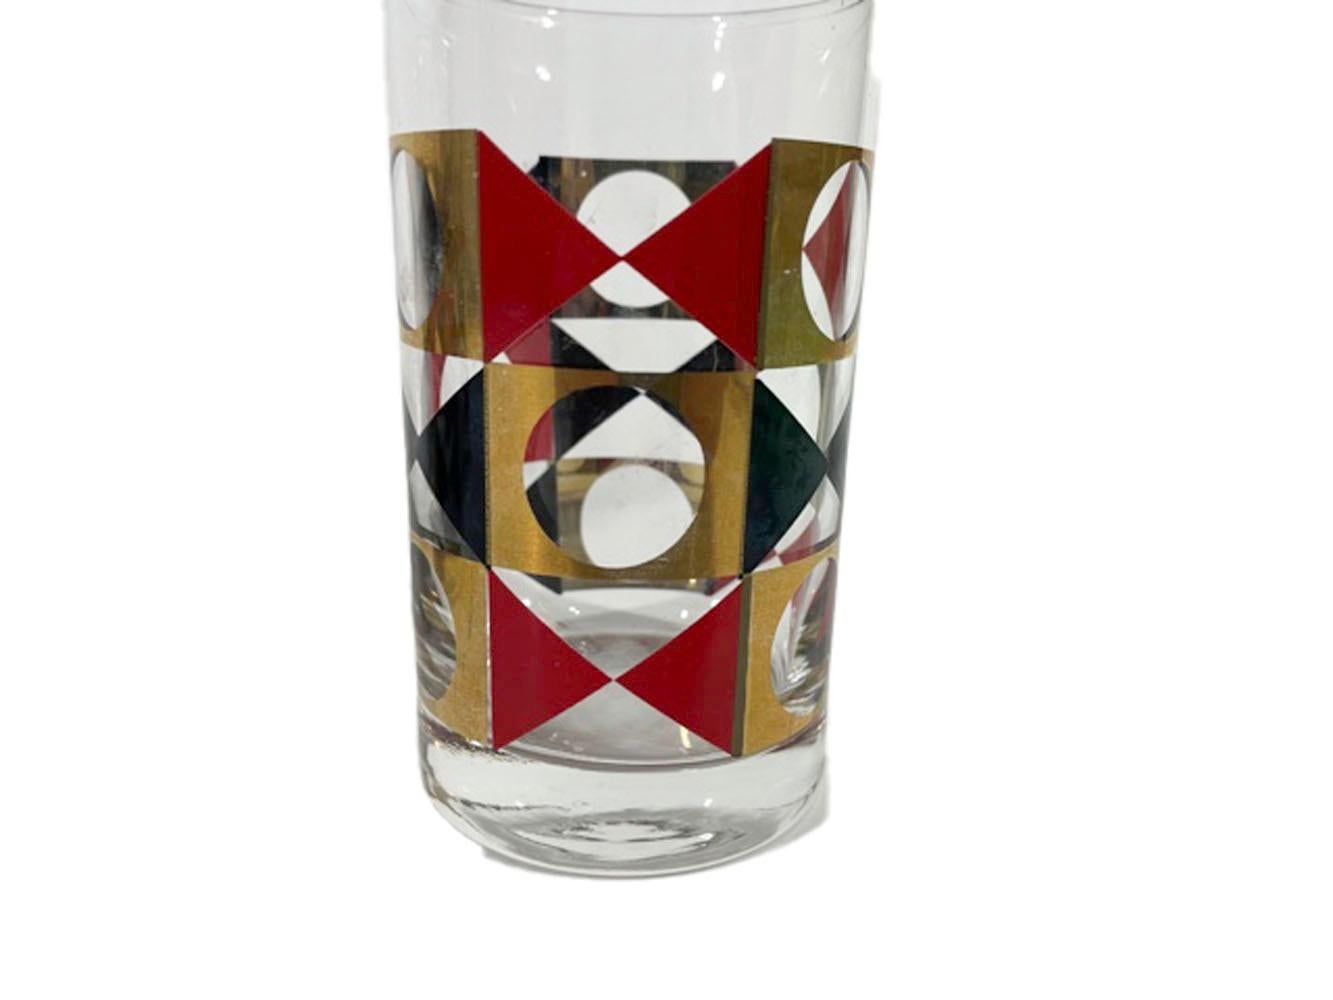 20th Century Set of 6 Vintage Geometric Cocktail Glasses in Red & Black Enamel with 22k Gold For Sale